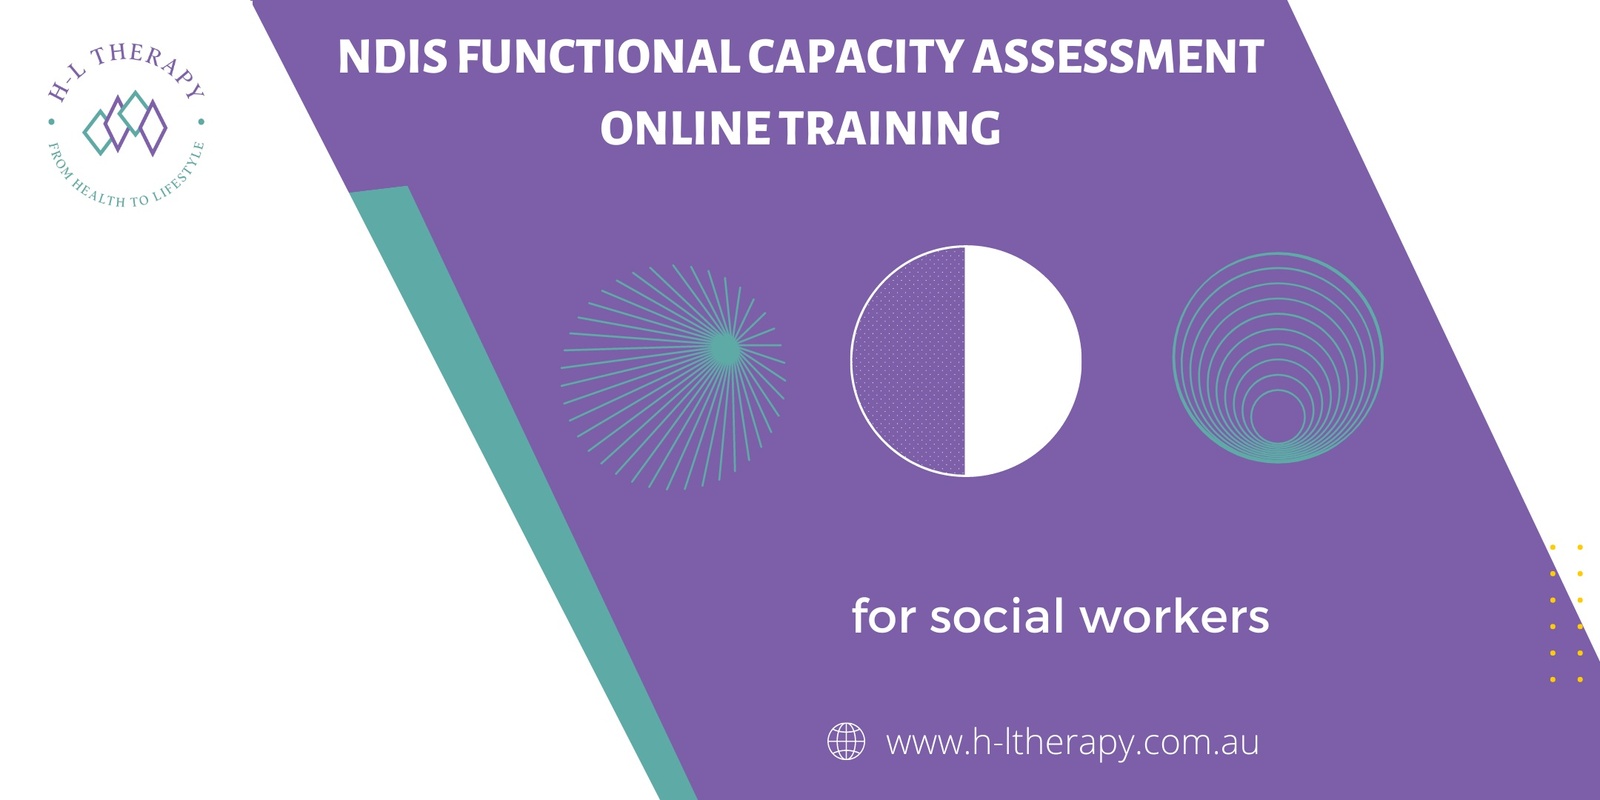 Work　Assessments　for　NDIS　Social　Humanitix　Functional　Capacity